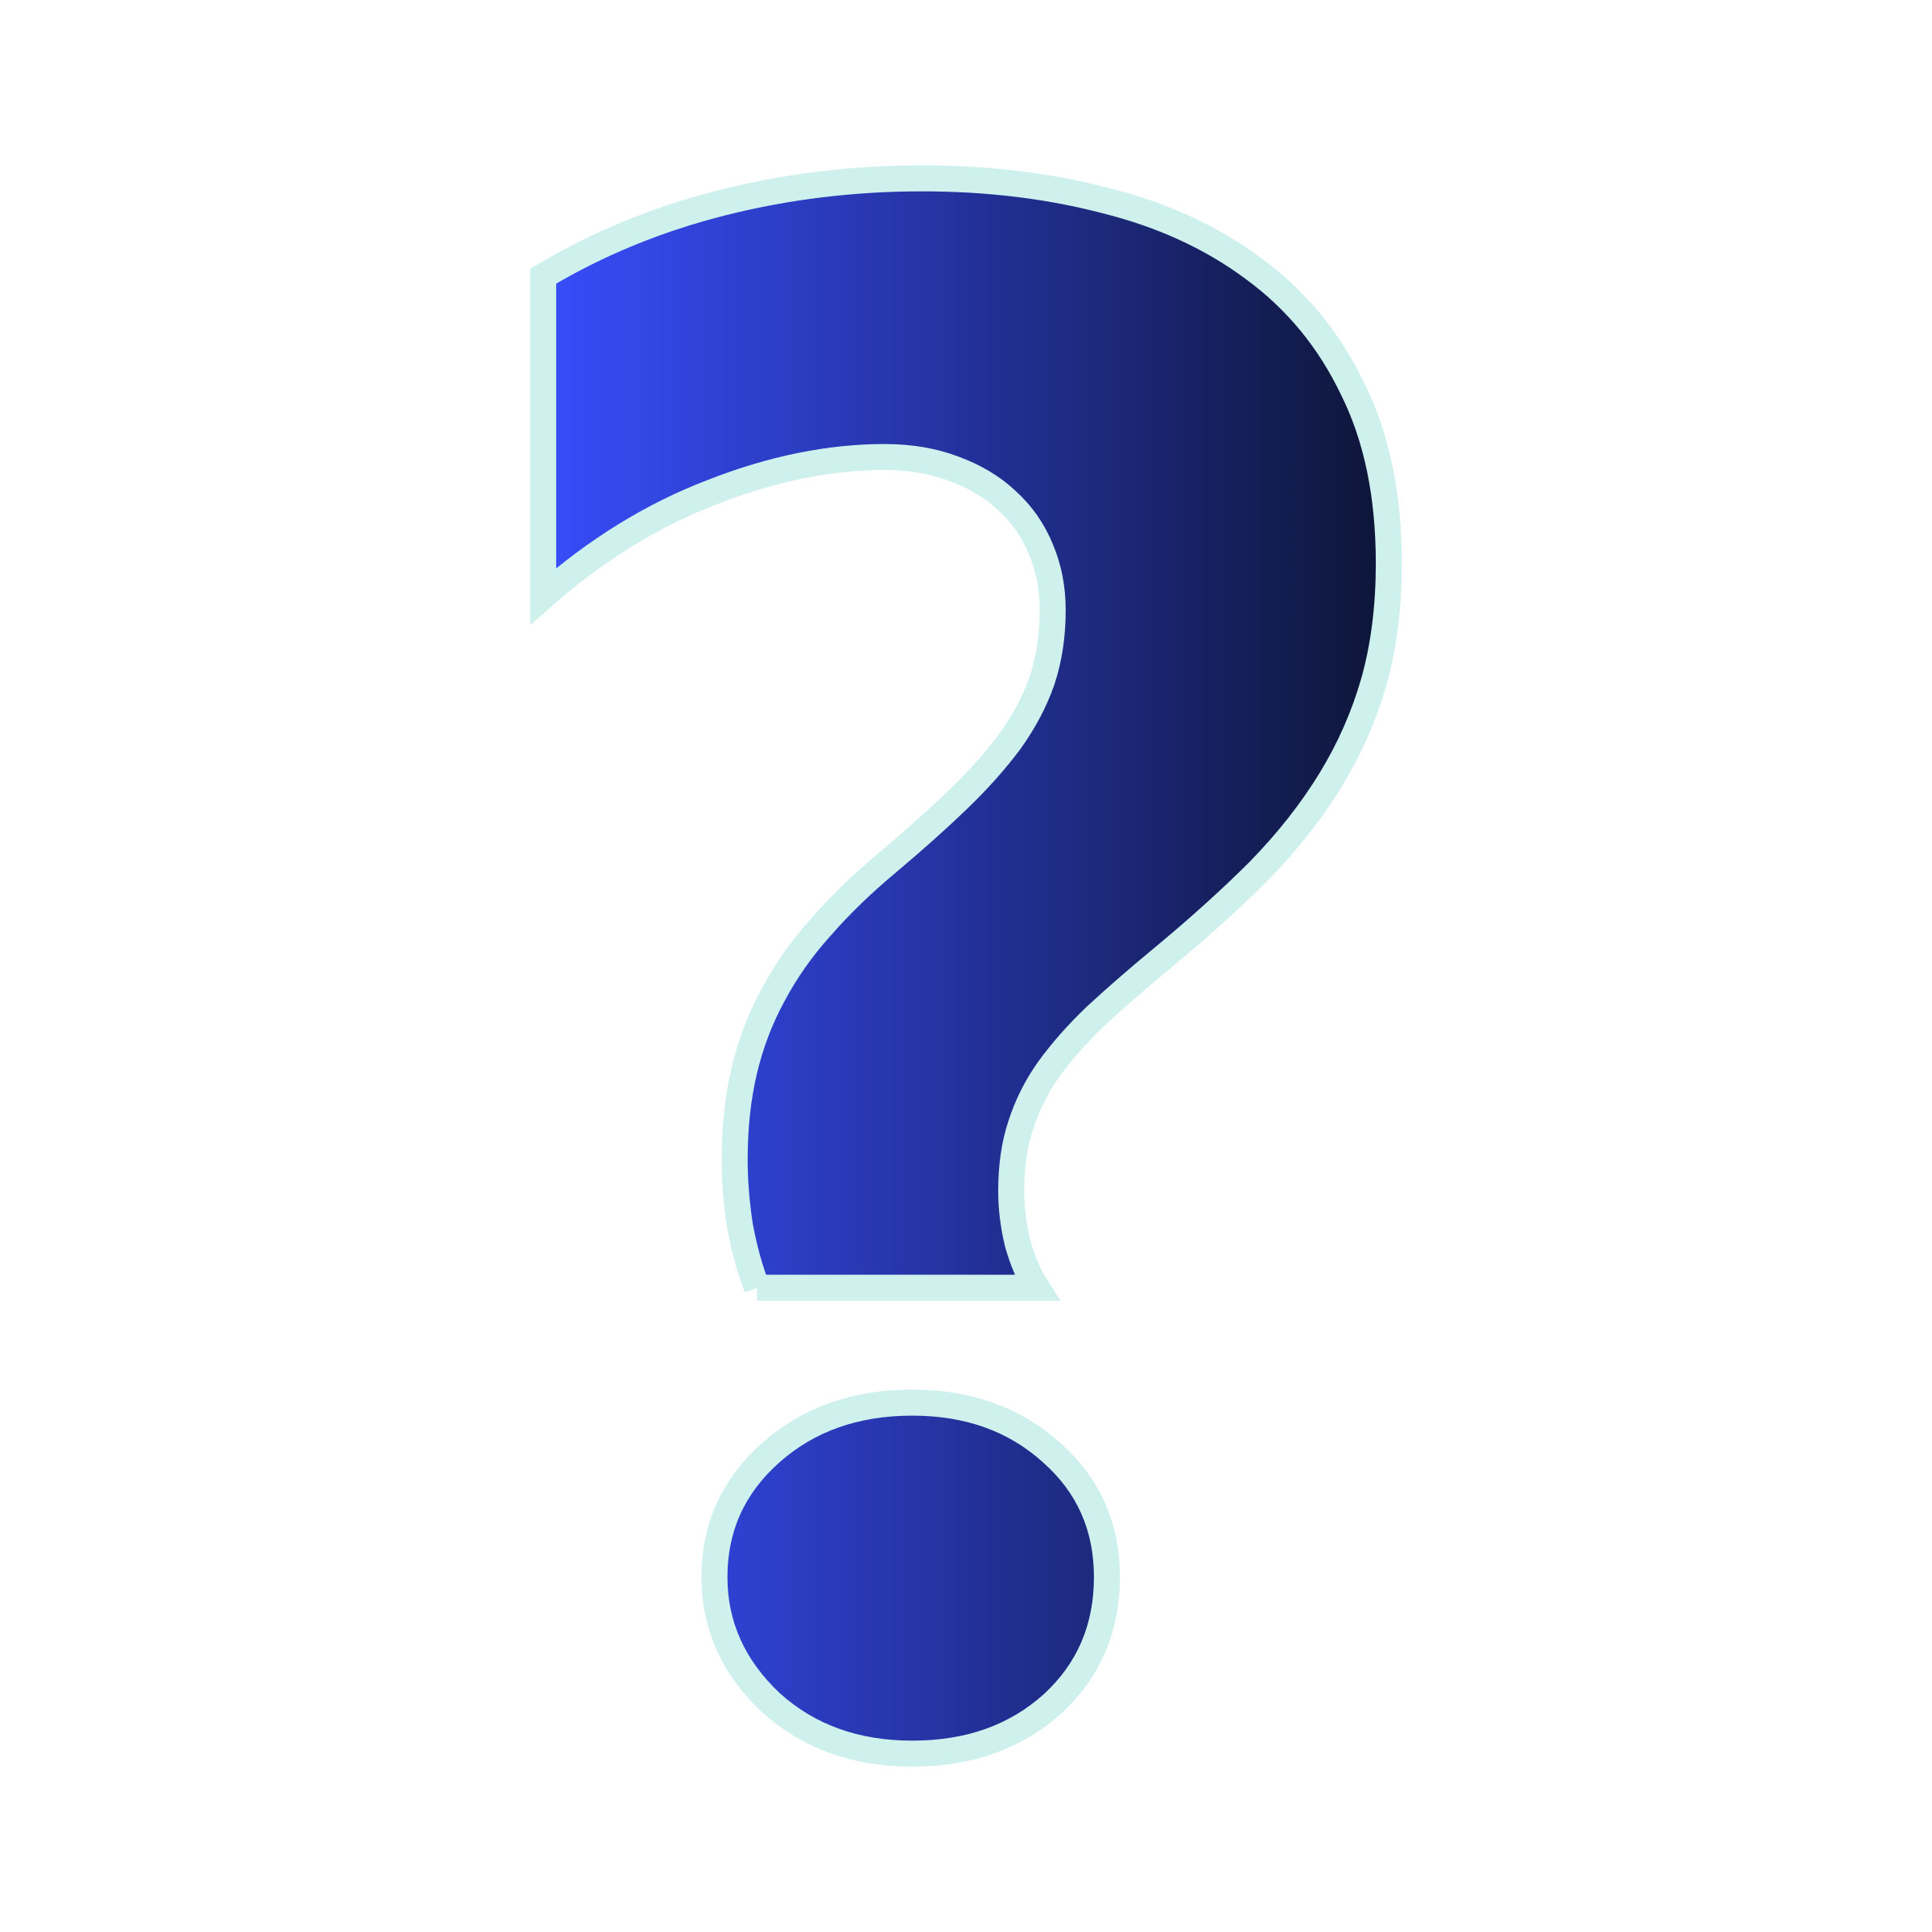 free clip art of a question mark - photo #37